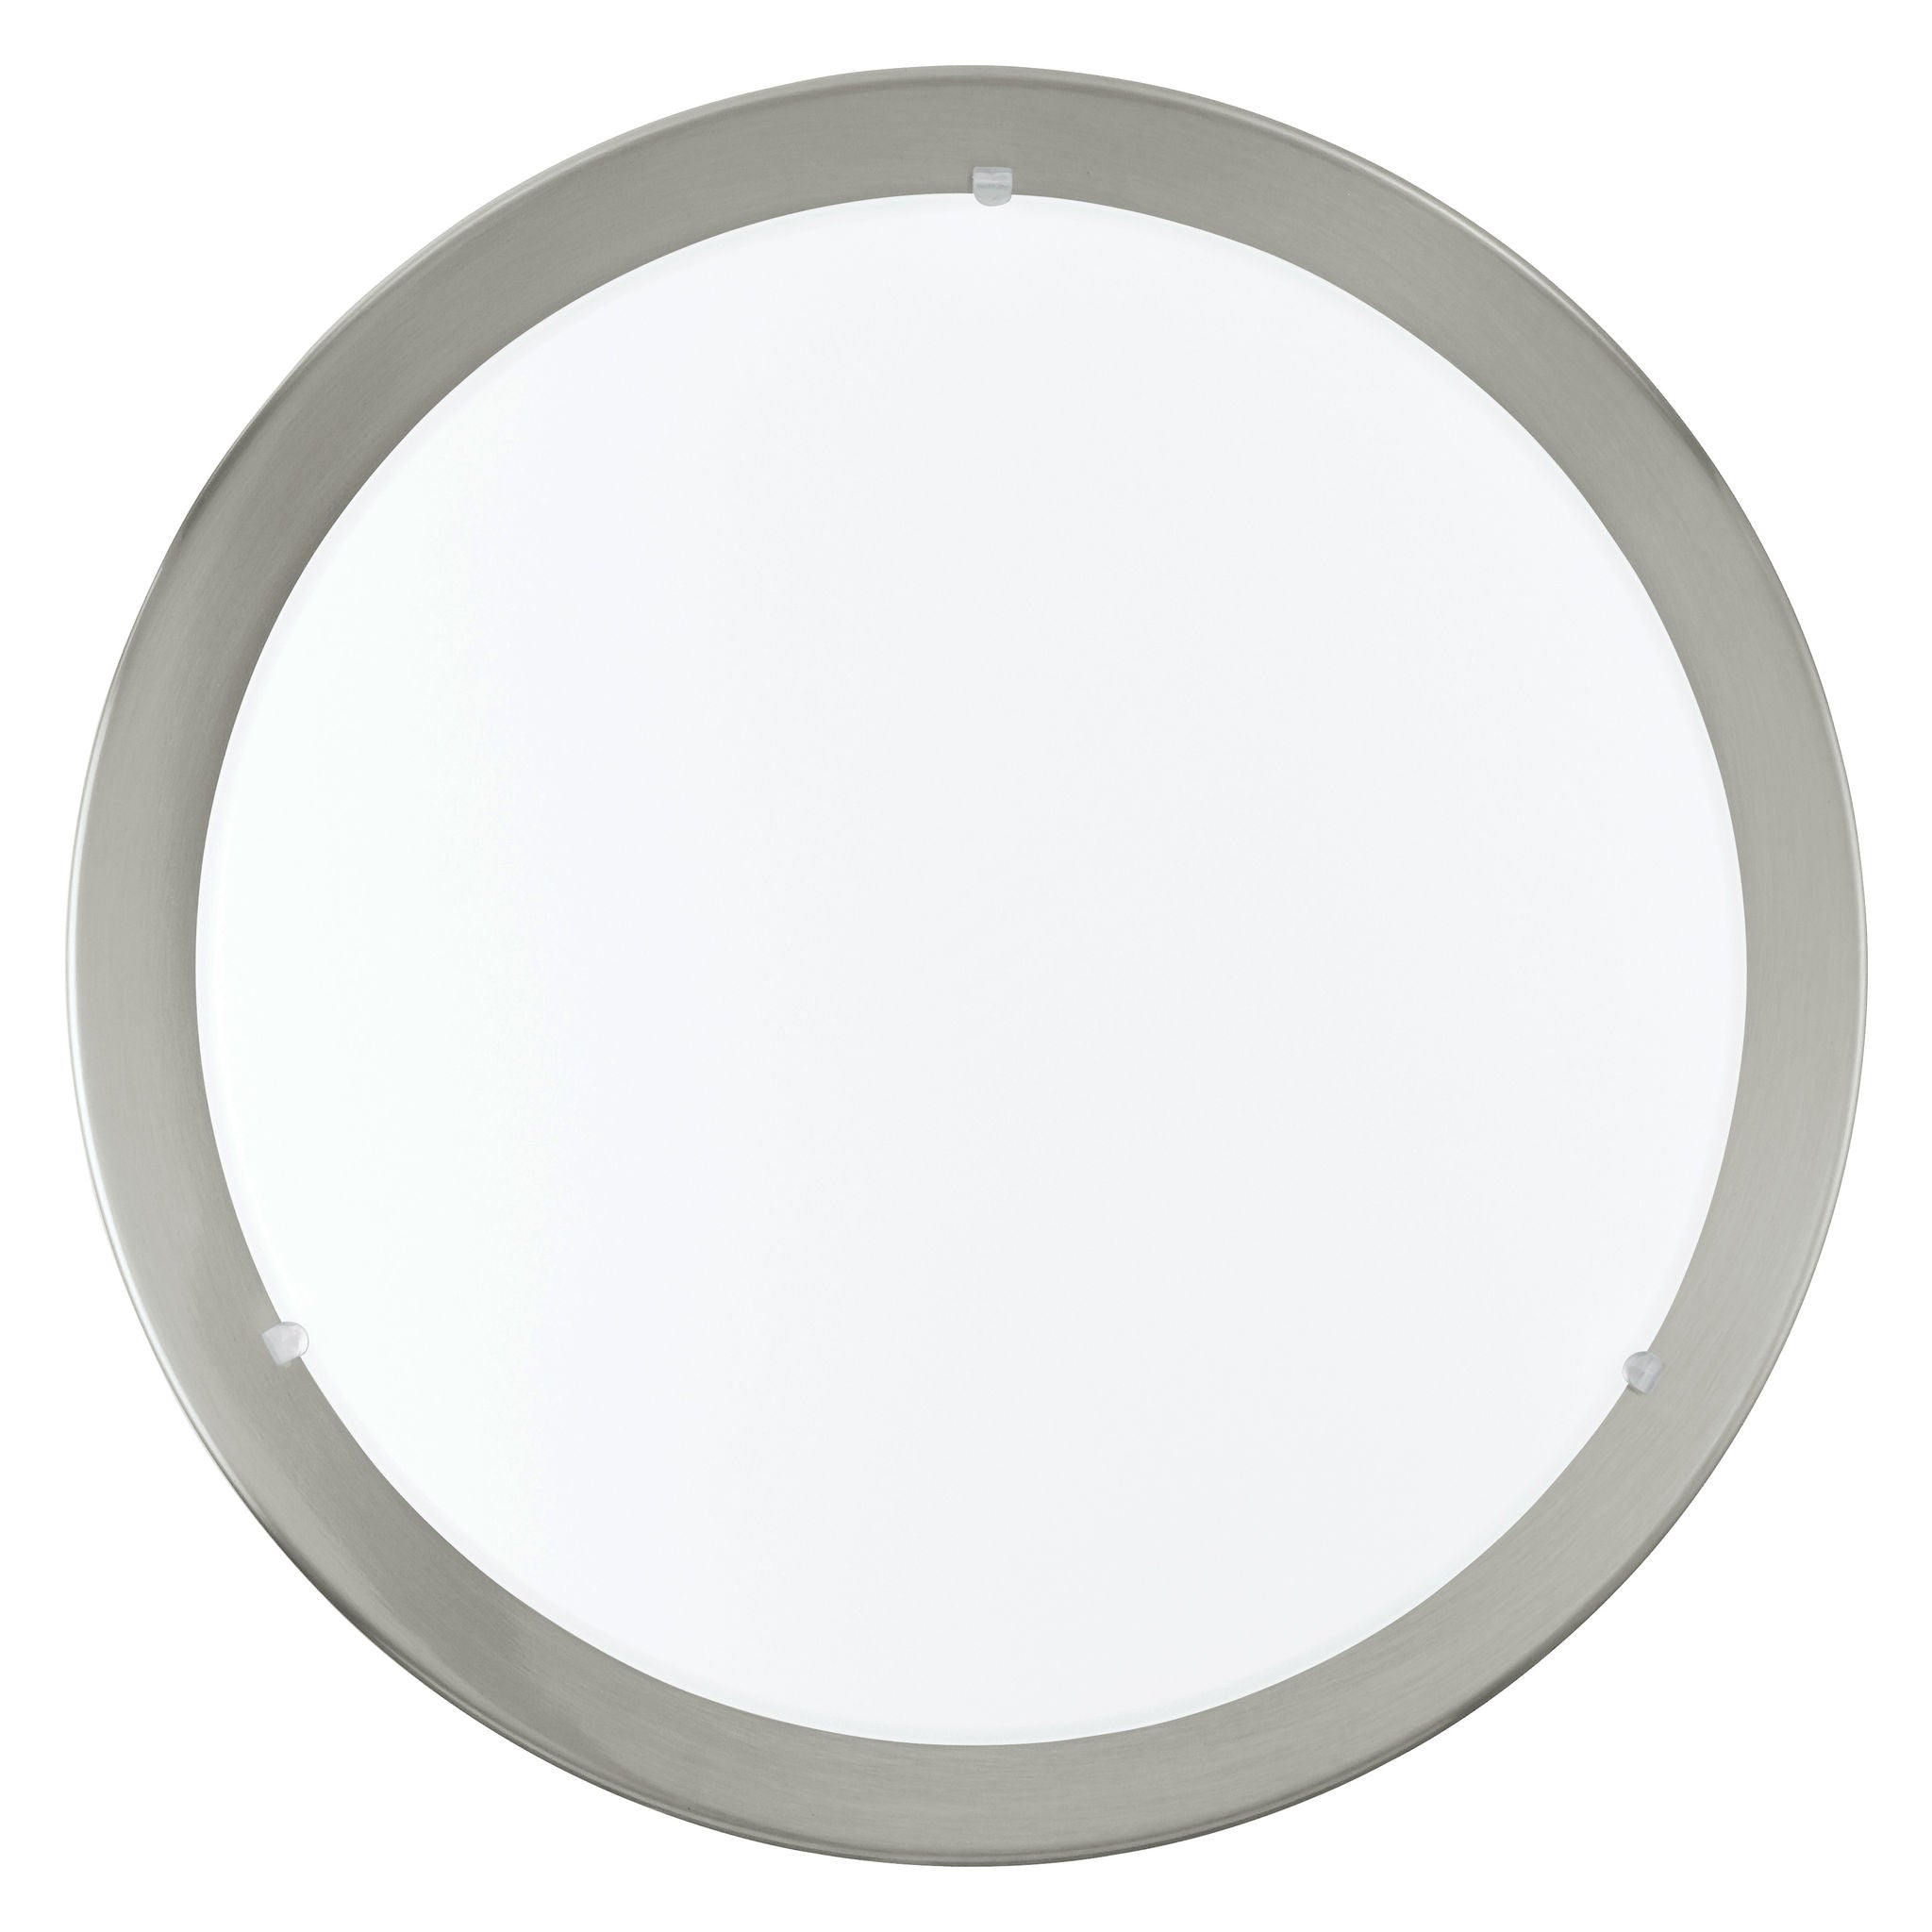 Kempton Flush mount Stainless steel INTEGRATED LED - 202157A | EGLO